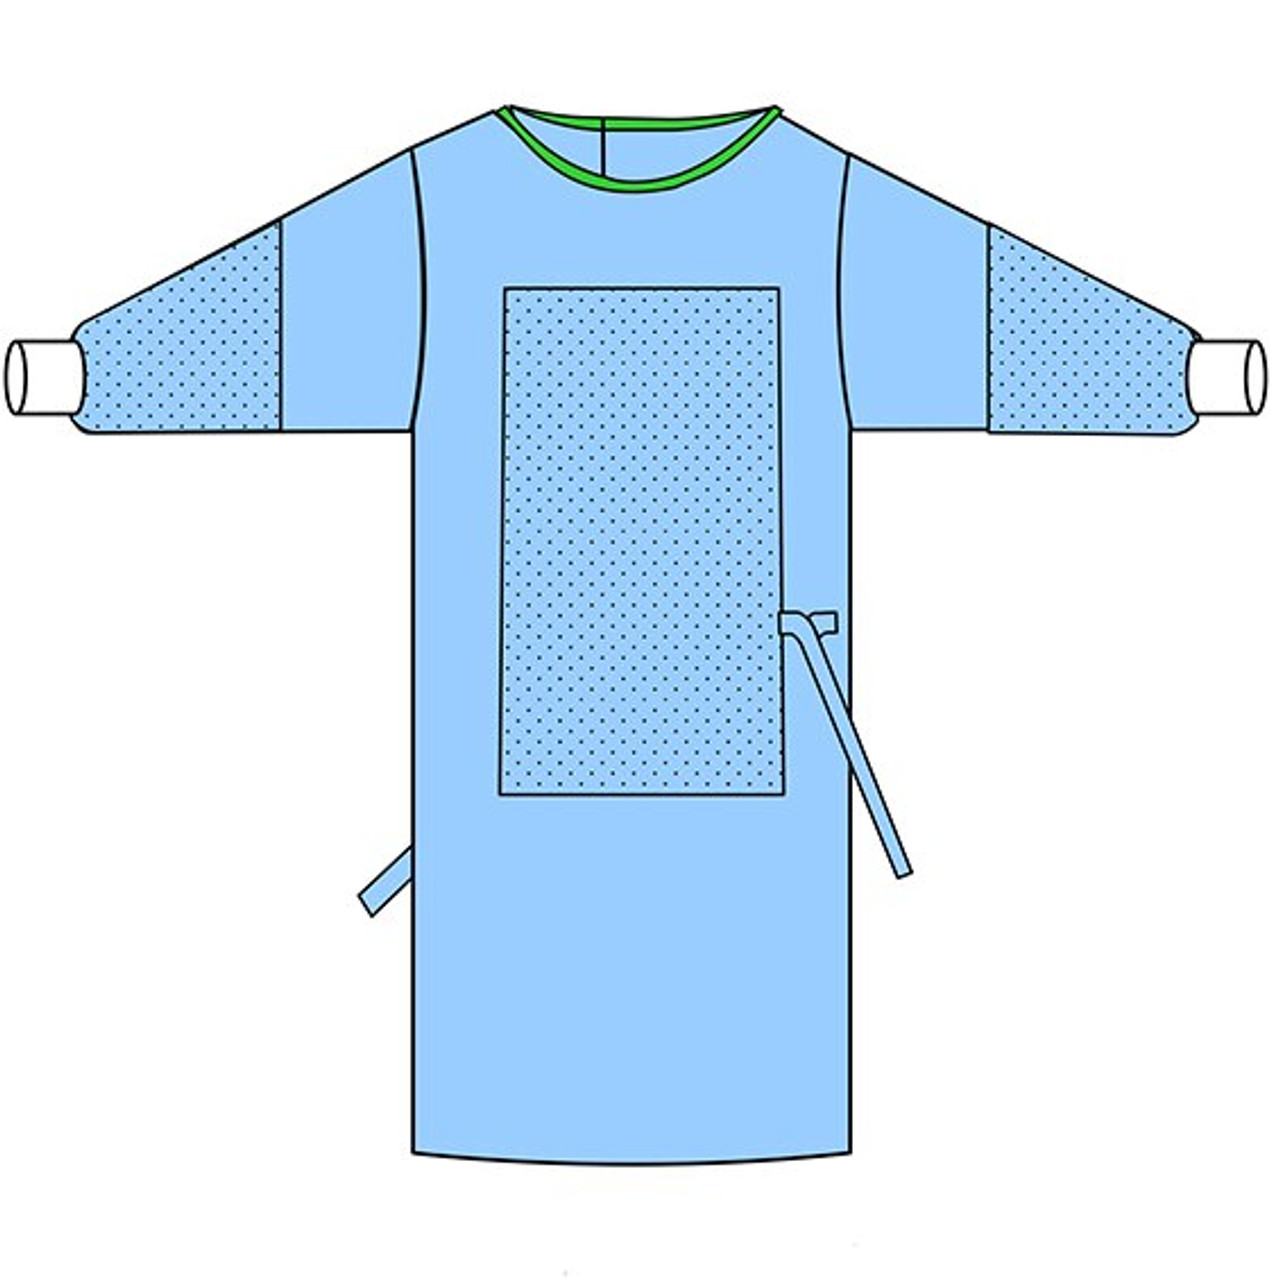 Surgical Gowns | Protective Medical Gowns | HALYARD